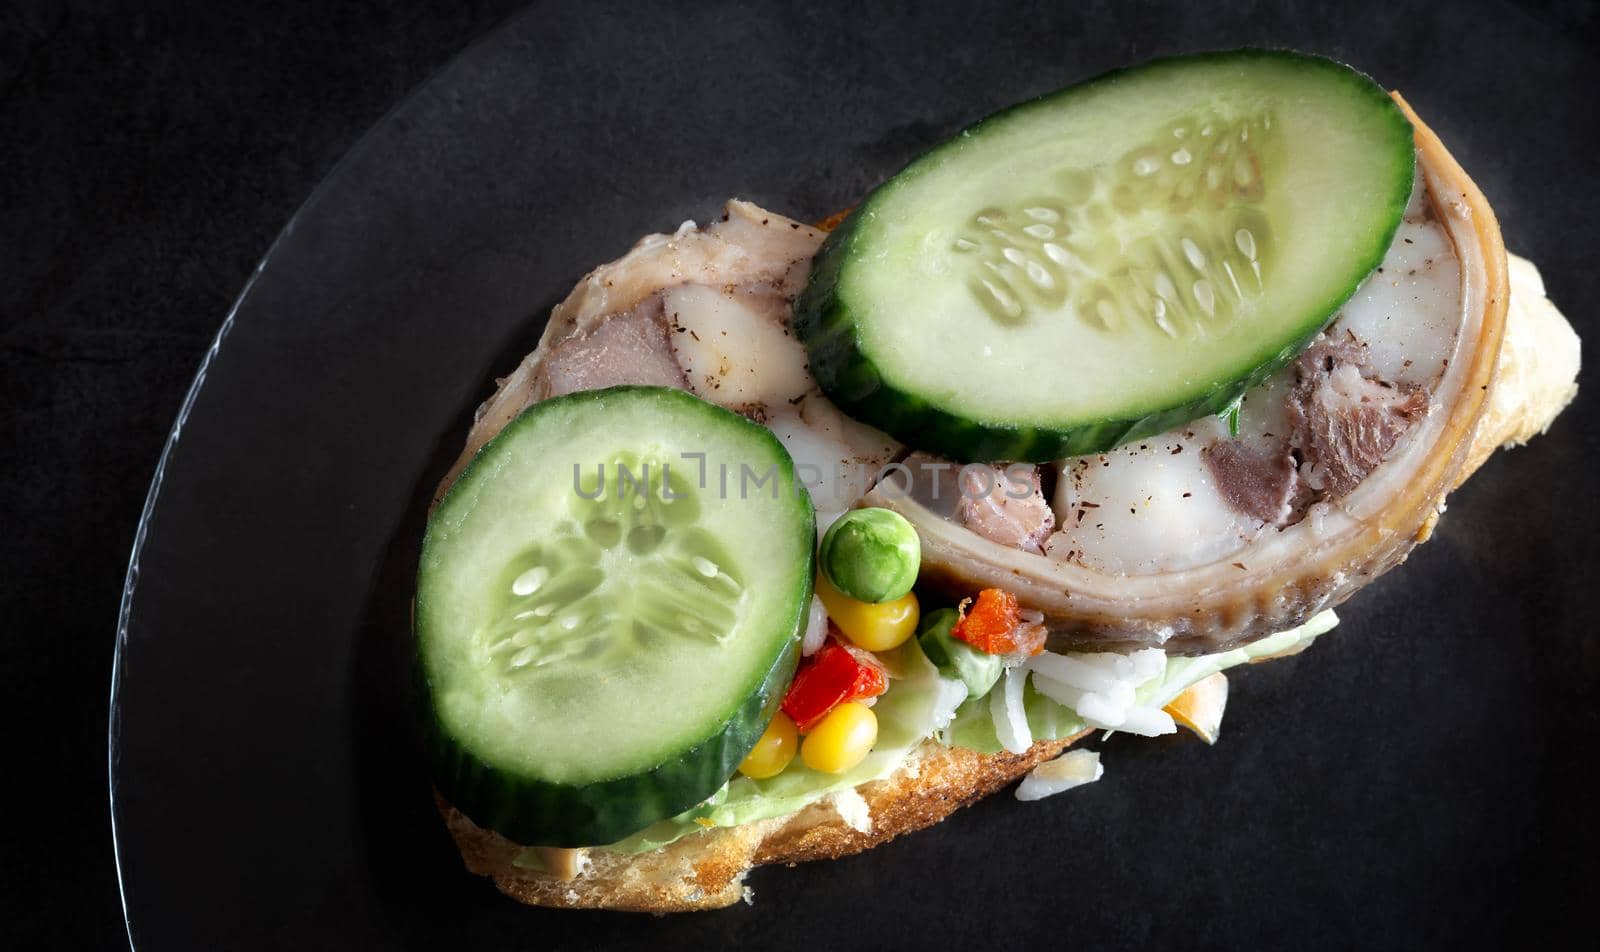 On a glass plate is a sandwich with a meat snack and vegetables. Top view, dark background, copy space